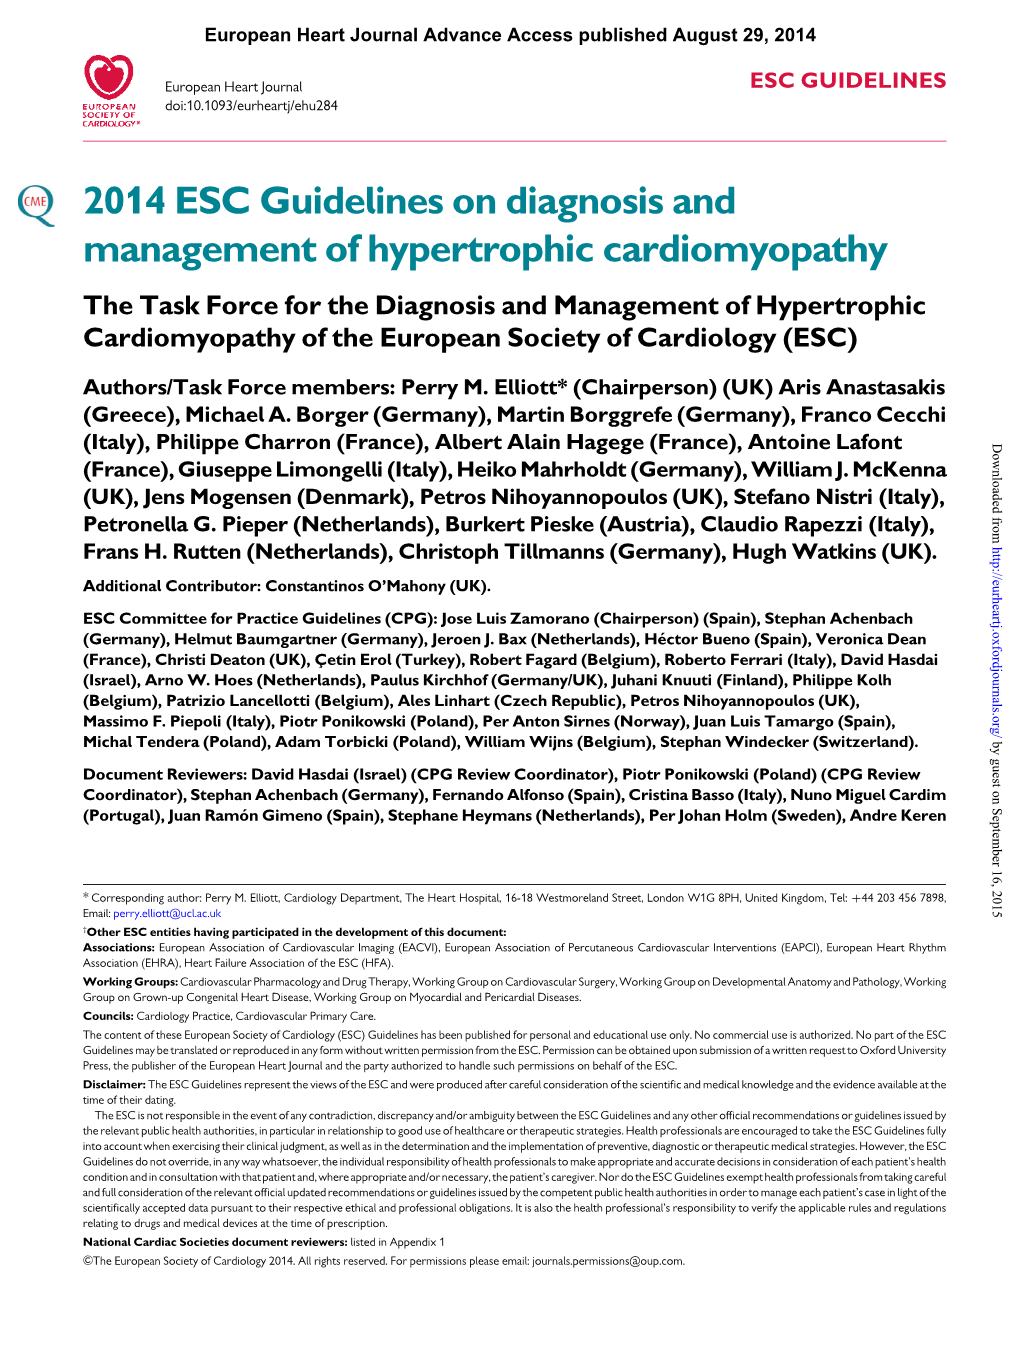 2014 ESC Guidelines on Diagnosis and Management of Hypertrophic Cardiomyopathy